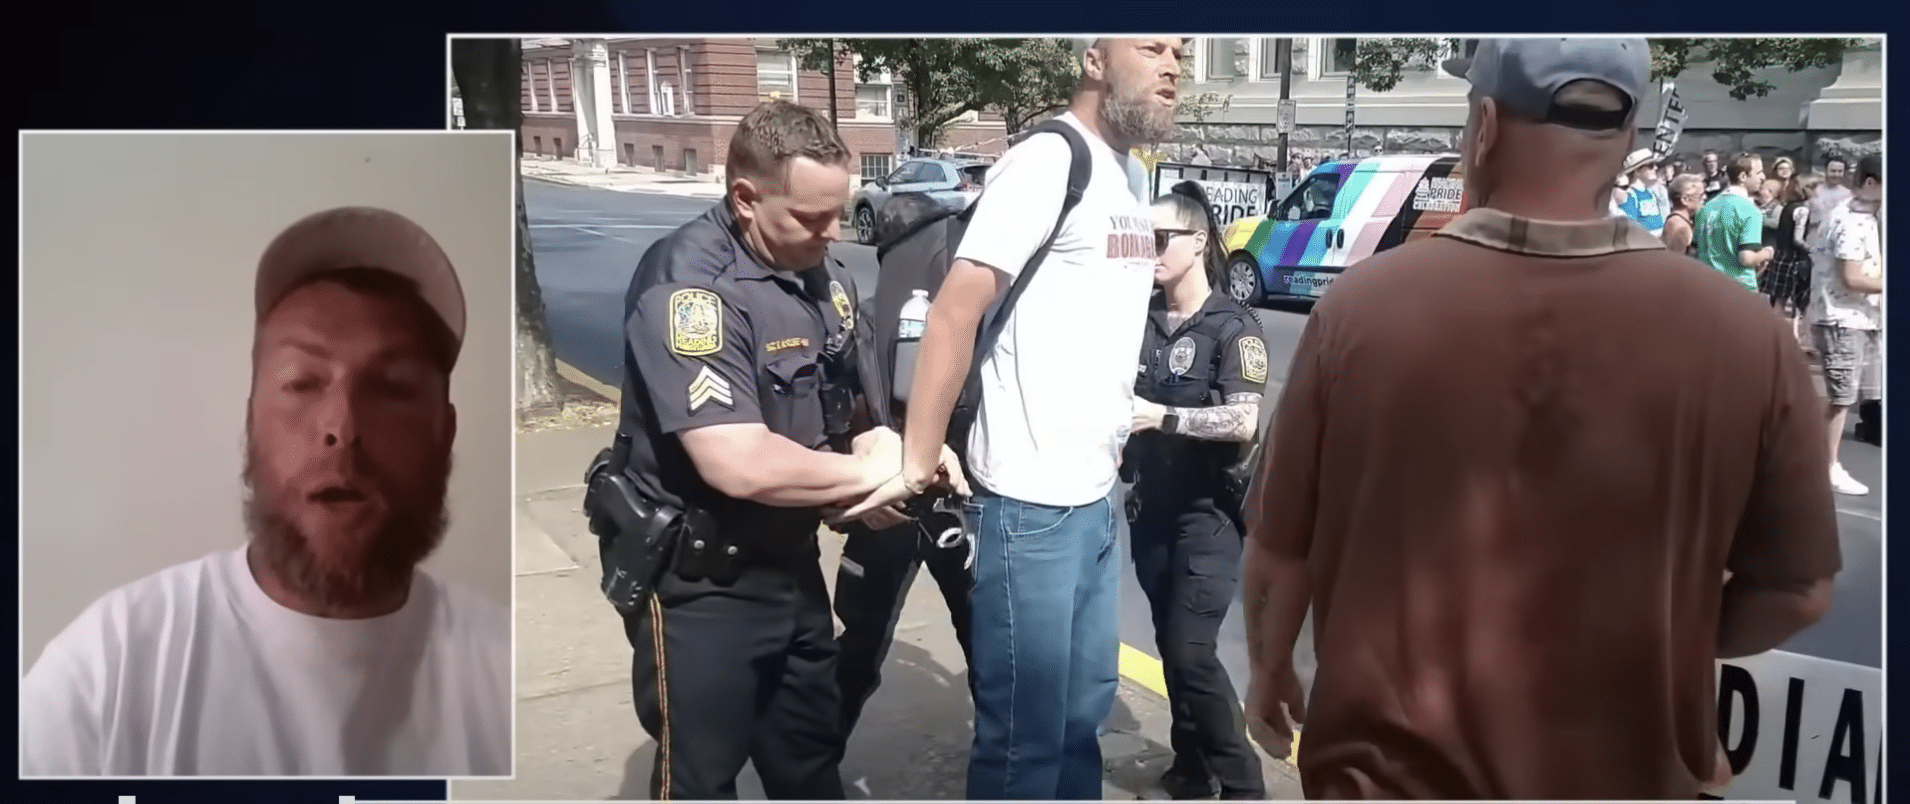 (WATCH) Christian preacher arrested for quoting Bible verses at crowd gathered for Pennsylvania Pride event